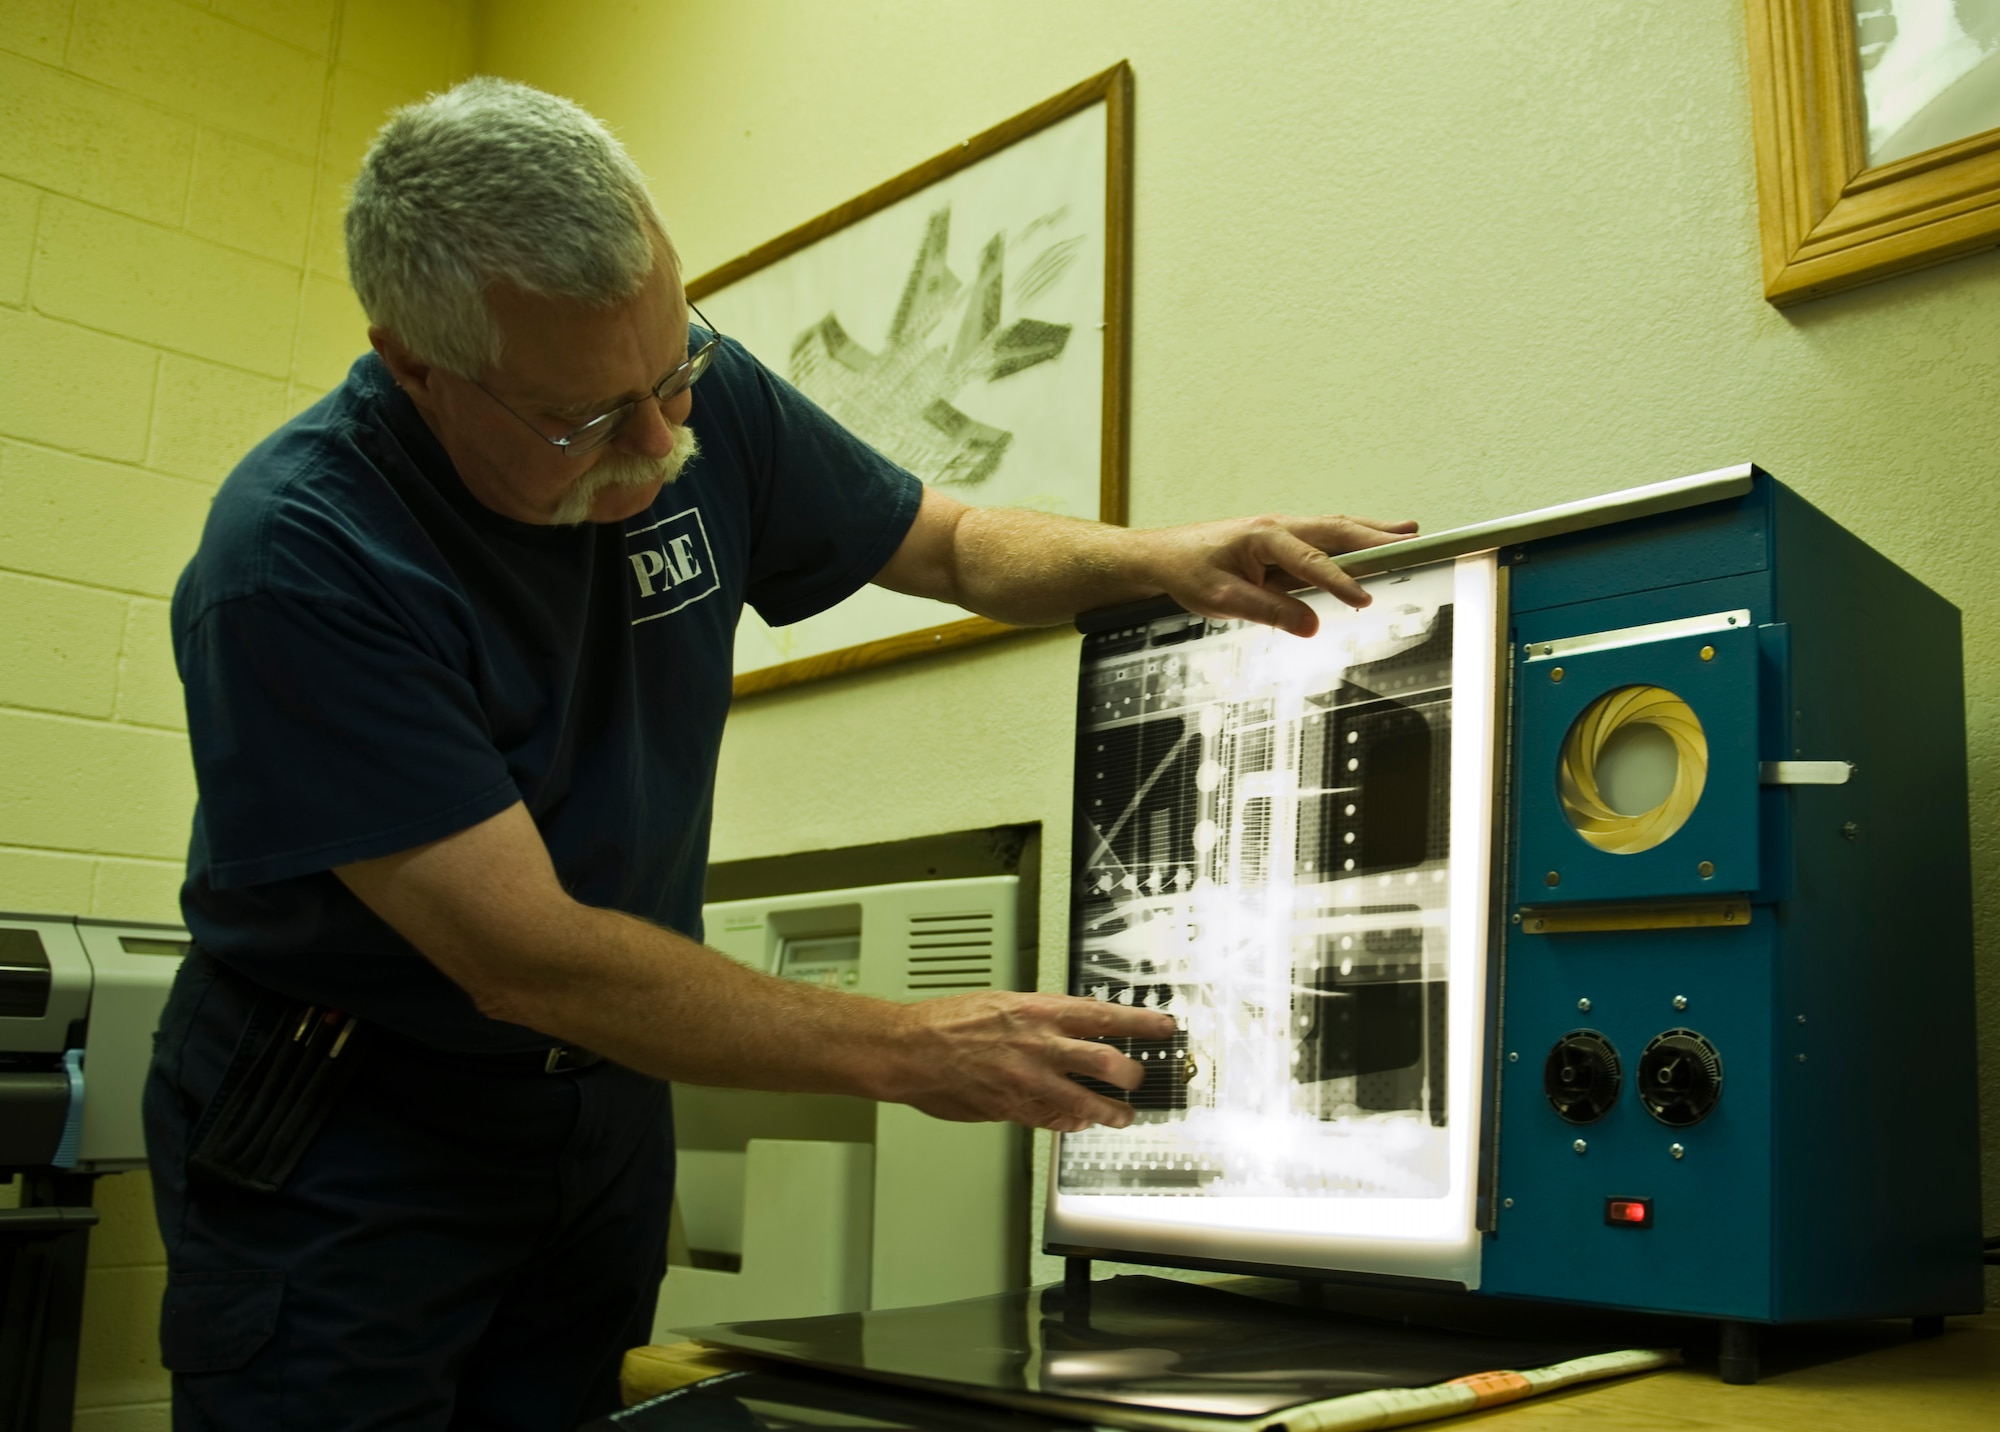 John Sanders, a contractor with the 57th Maintanence Group, looks at a film x-ray of an aircraft at the Nondestructive Inspection Laboratory on Nellis Air Force Base, Nev., Aug. 11, 2015. The NDI Lab utilizes x-rays to pin-point possible damage to aircraft components.(U.S. Air Force photo by Airman 1st Class Rachel Loftis)